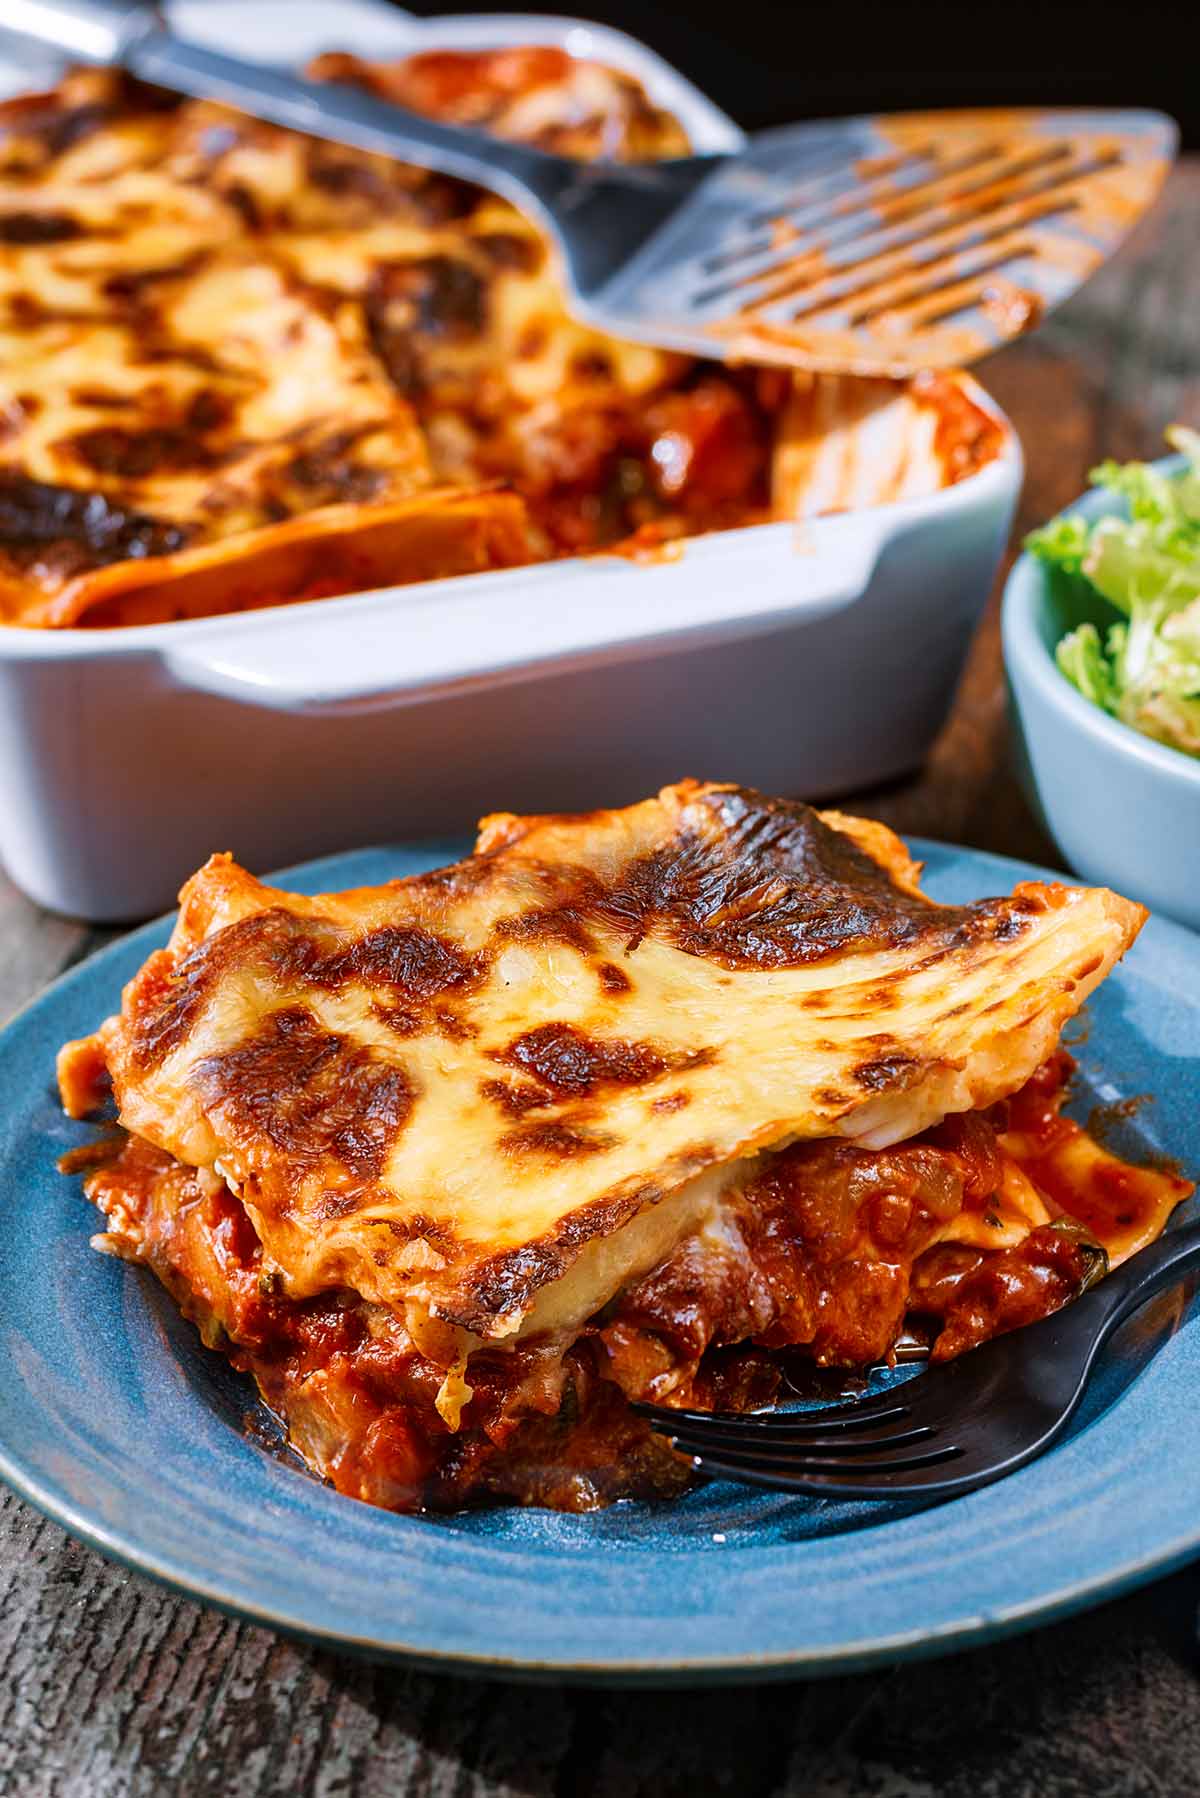 A portion of lasagna on a plate in front of a baking dish with remaining lasagna in it.